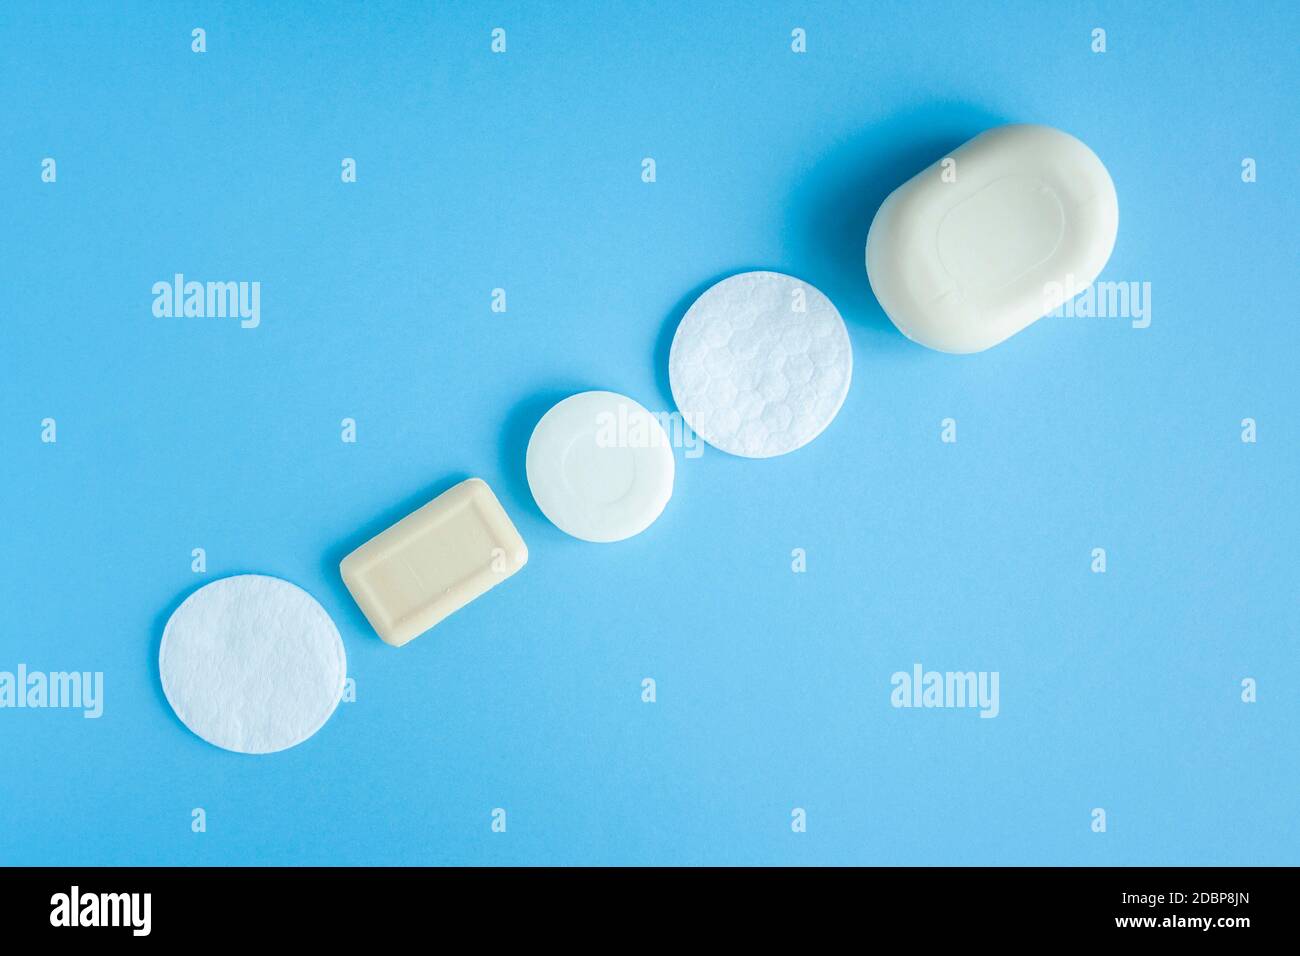 Composition of soap and cotton pads top view. Self hygiene against bacteria and viruses. Compliance with hygiene and sterility to combat coronavirus. Stock Photo